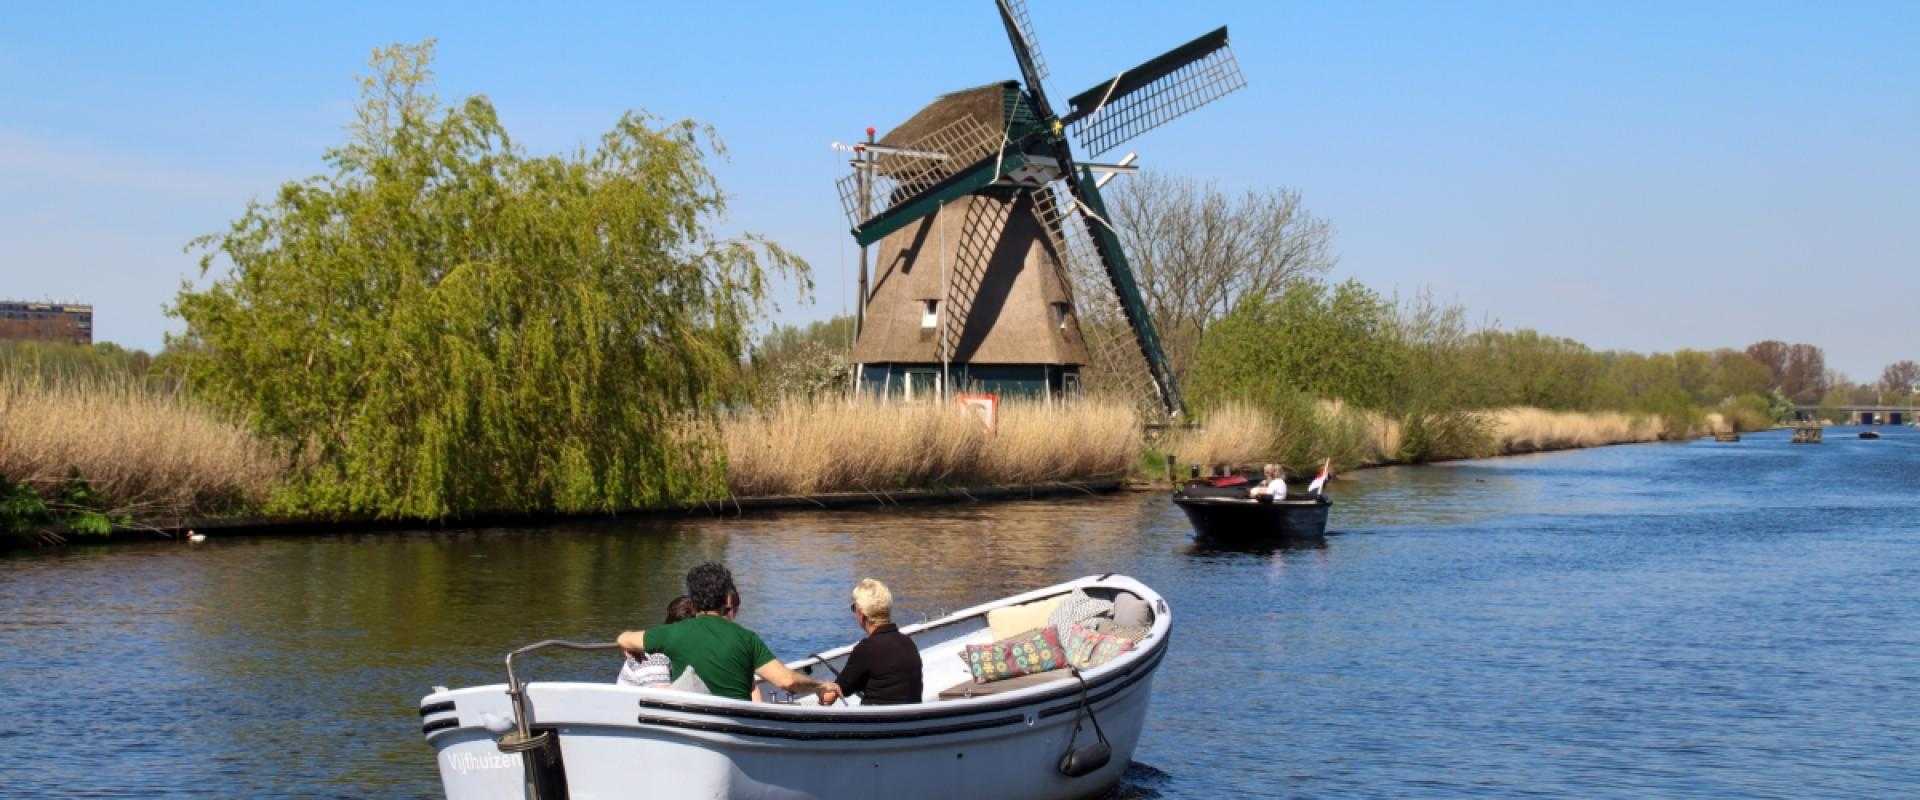 Sailing on the ring canal with a windmill in the background